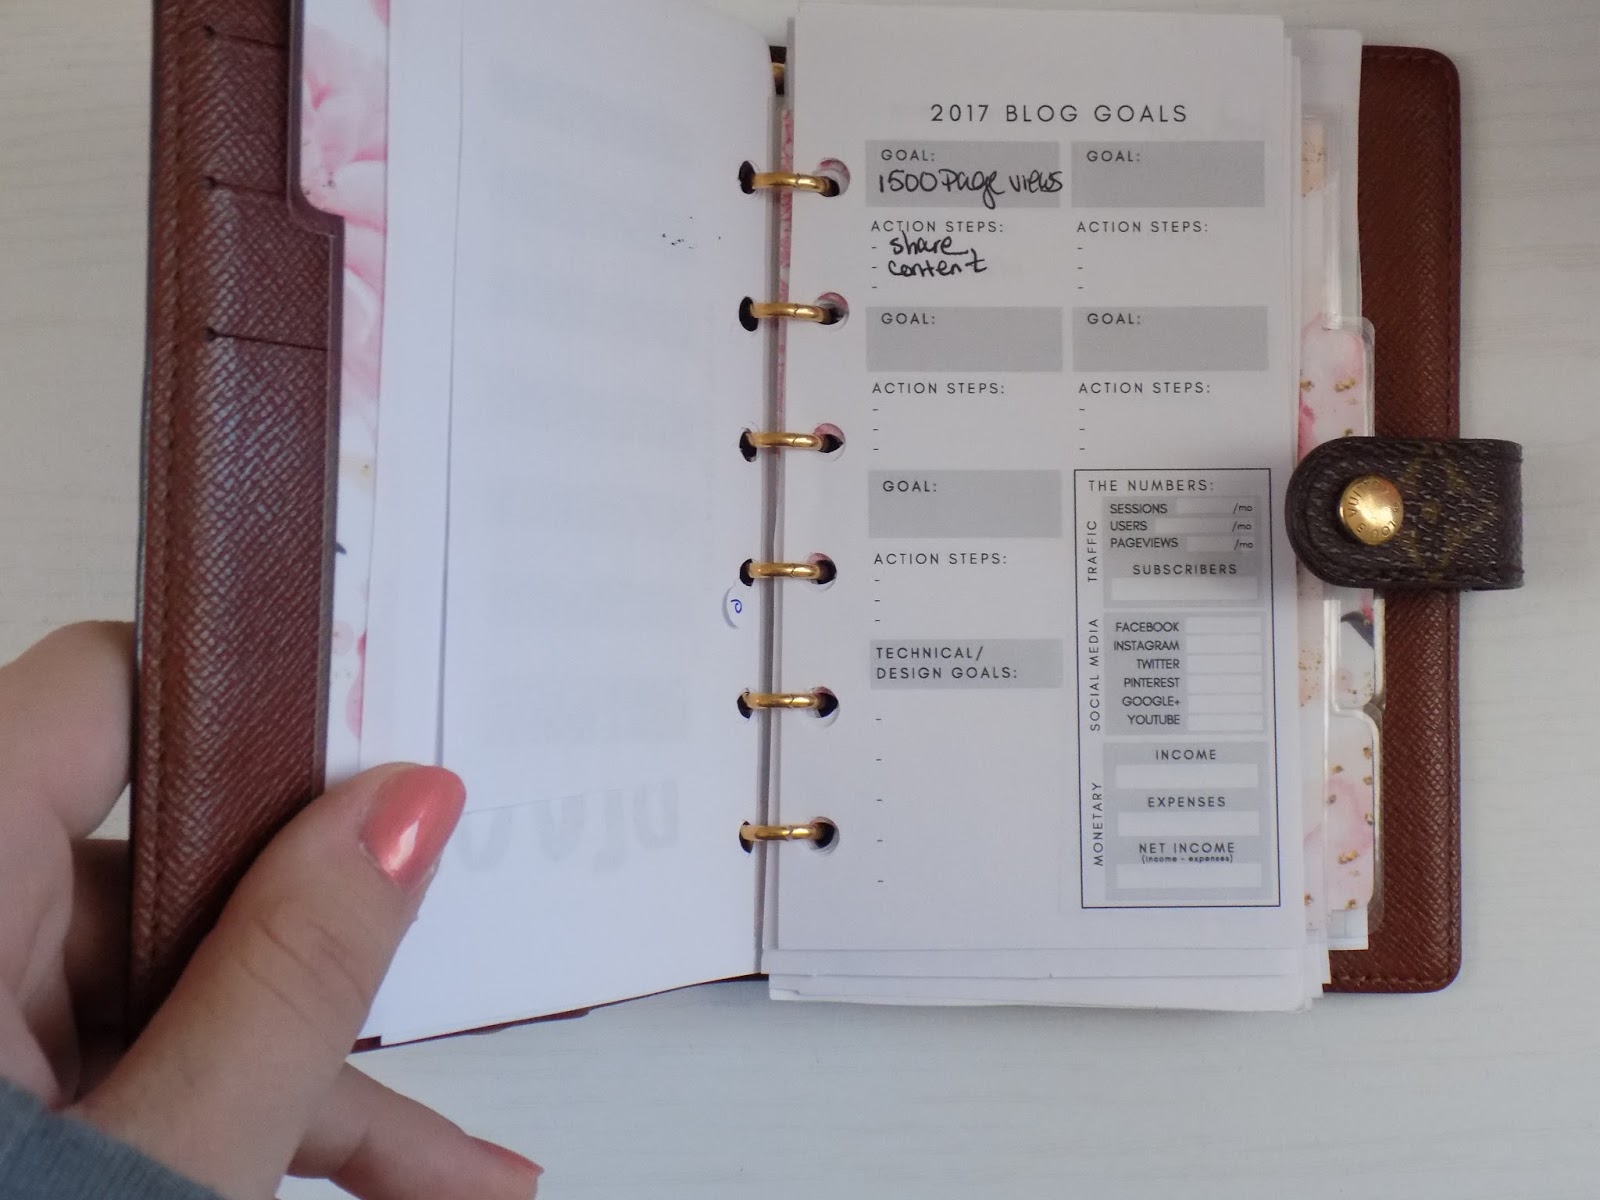 Royally Planned: Review of the Louis Vuitton MM Agenda